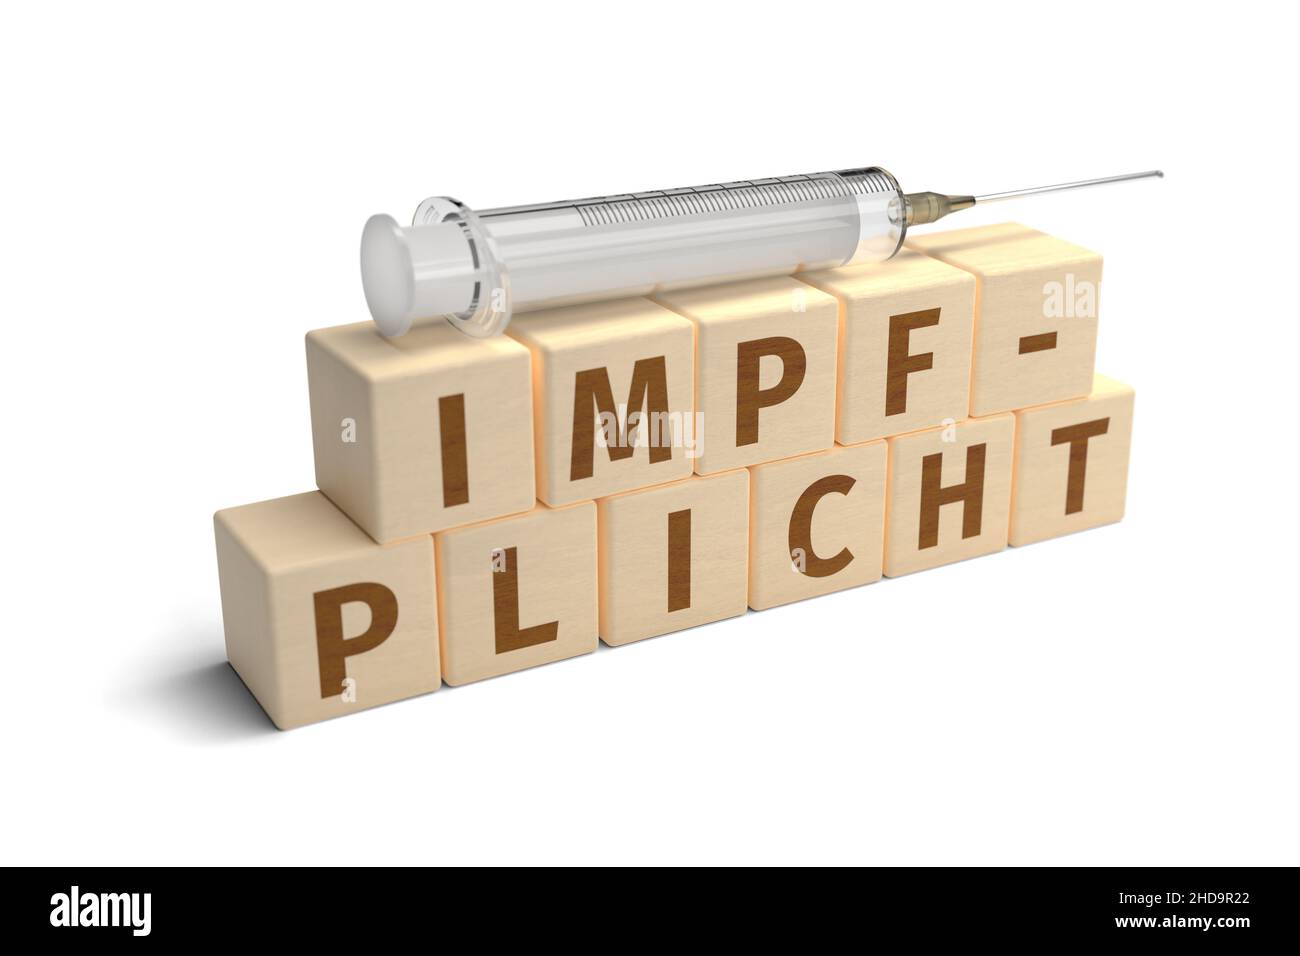 The German word Impfpflicht (mandatory vaccination) built from letters on wooden cubes. A syringe on top. Isolated on pure white. Stock Photo